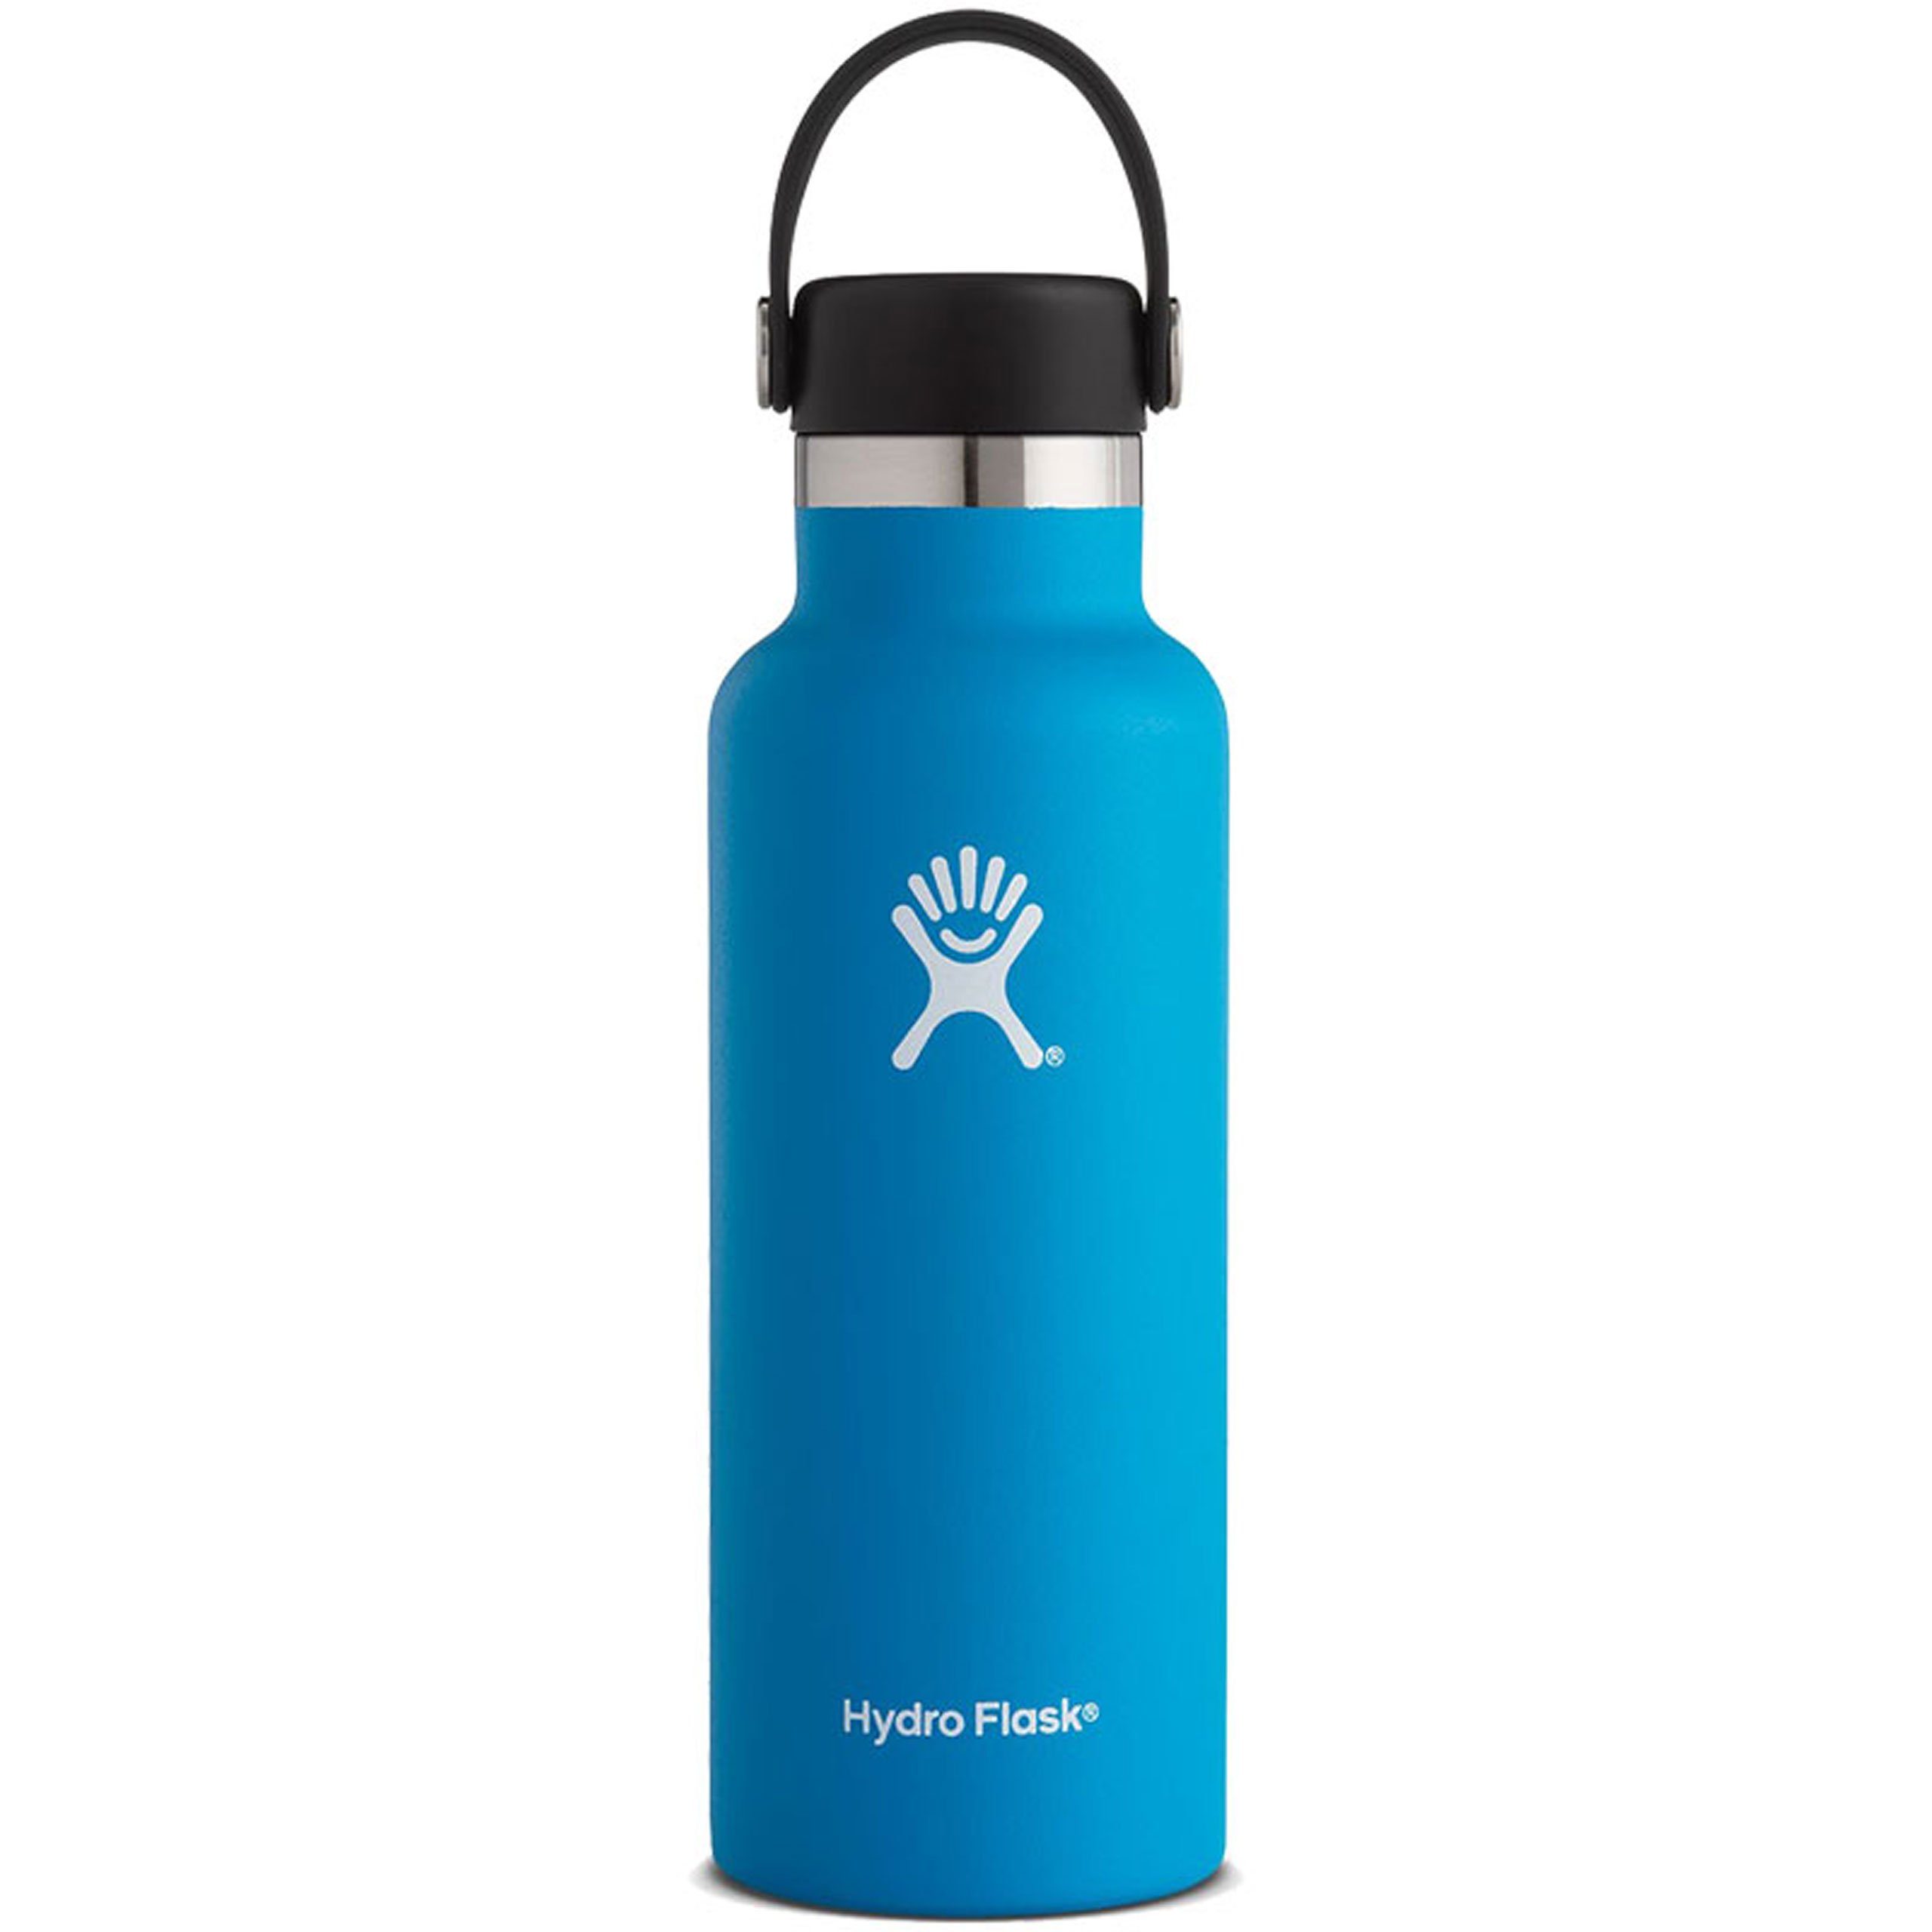 Hydro Flask Isolierflasche Hydro Flask Bottle Standard Mouth - Isolierflasche/Thermoflasche pacific